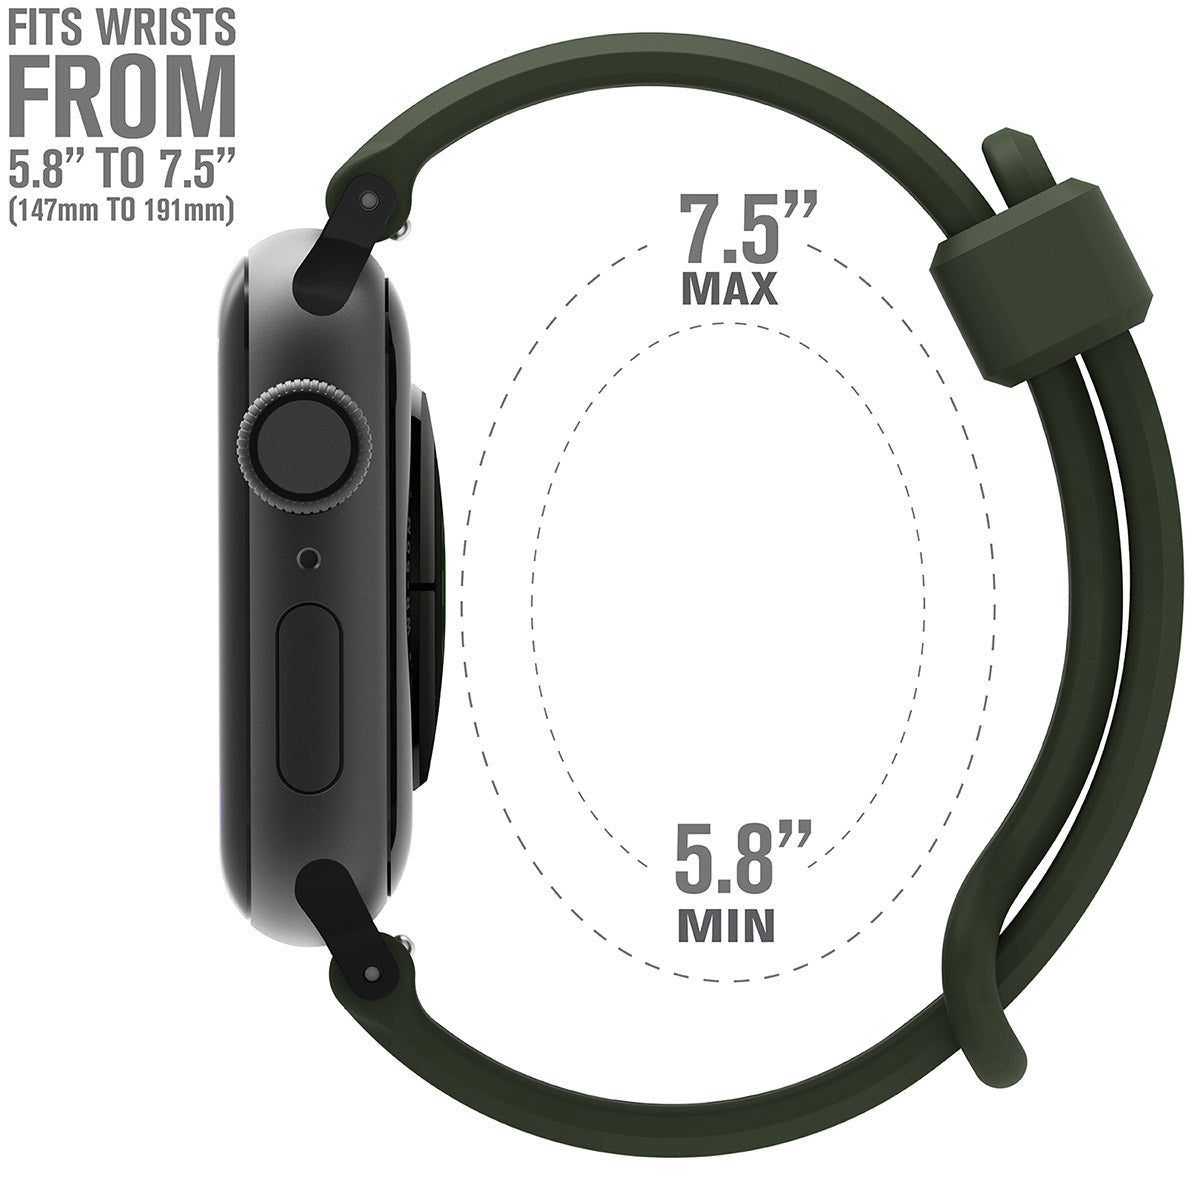 catalyst apple watch series 9 8 7 6 5 4 se gen 2 1 38 40 41mm sports band with apple connector side of apple watch with the minimum and maximum sizes of the sport band army green text reads fits wrists from 5.8" to 7.5"(147mm to 191mm)